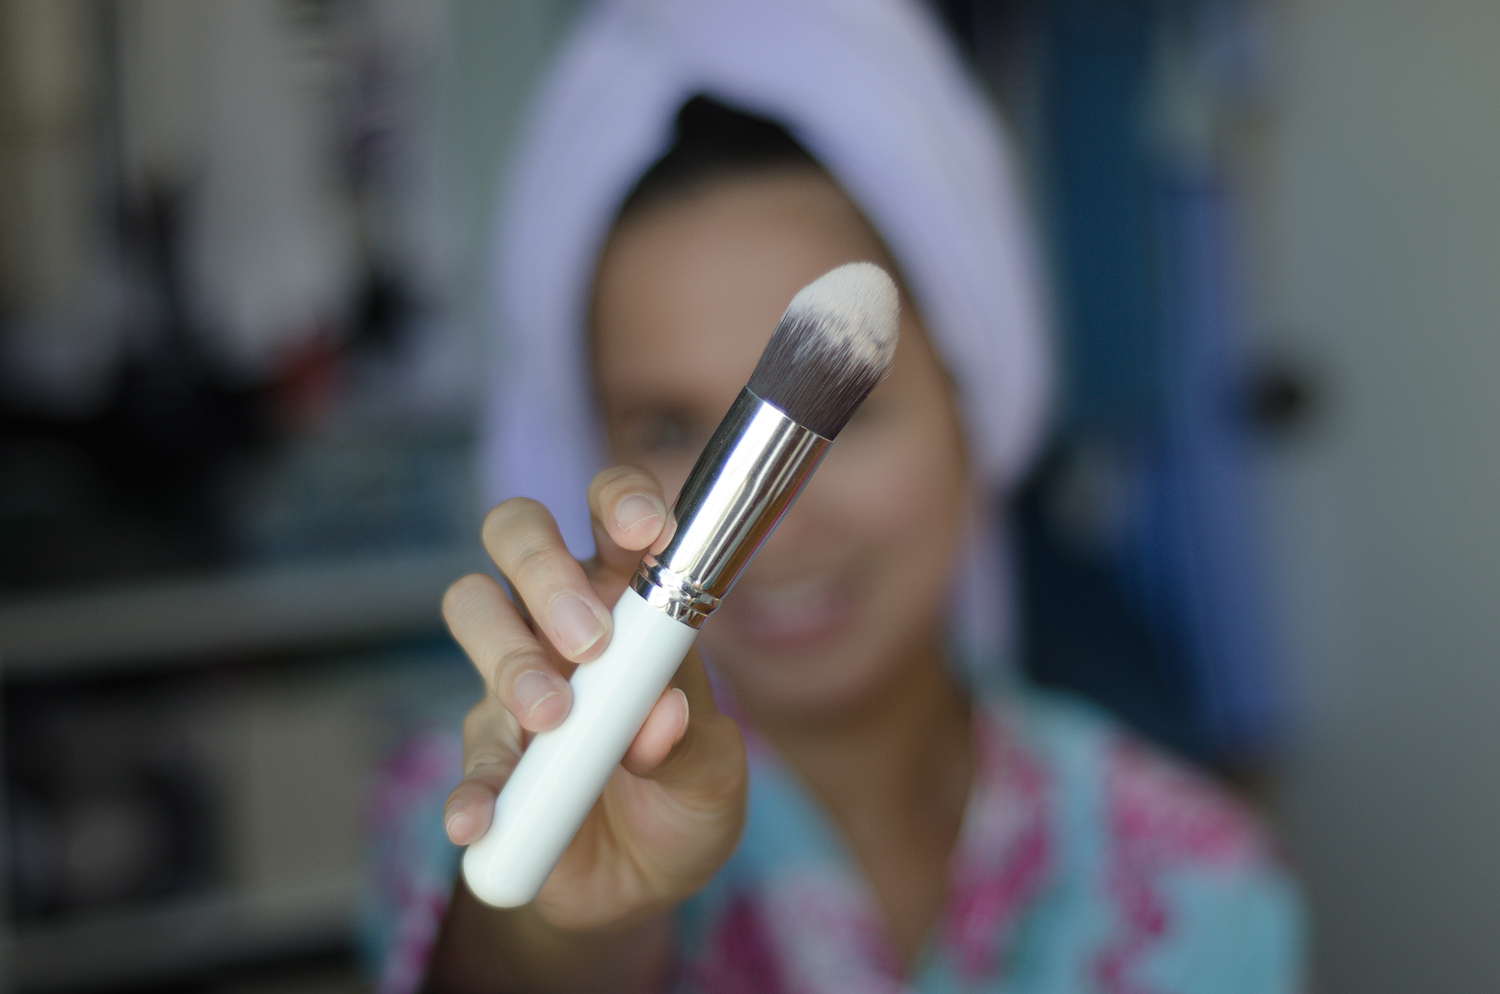 Beauty, Blog, Reviews, Beauty Reviews, Makeup Haul, How to Use Naturactor Cover Face Concealer, Silky Lucent Loose Powder, Philippine Beauty Blogger, Cebu Beauty Blogger, Makeup, Tutorial, Cebu Fashion Blogger, Cebu Blogger, Asian, Let's Stylize Cosmetics, Toni Pino-Oca, Miss Bella Brushes, Tapered Kabuki Brush